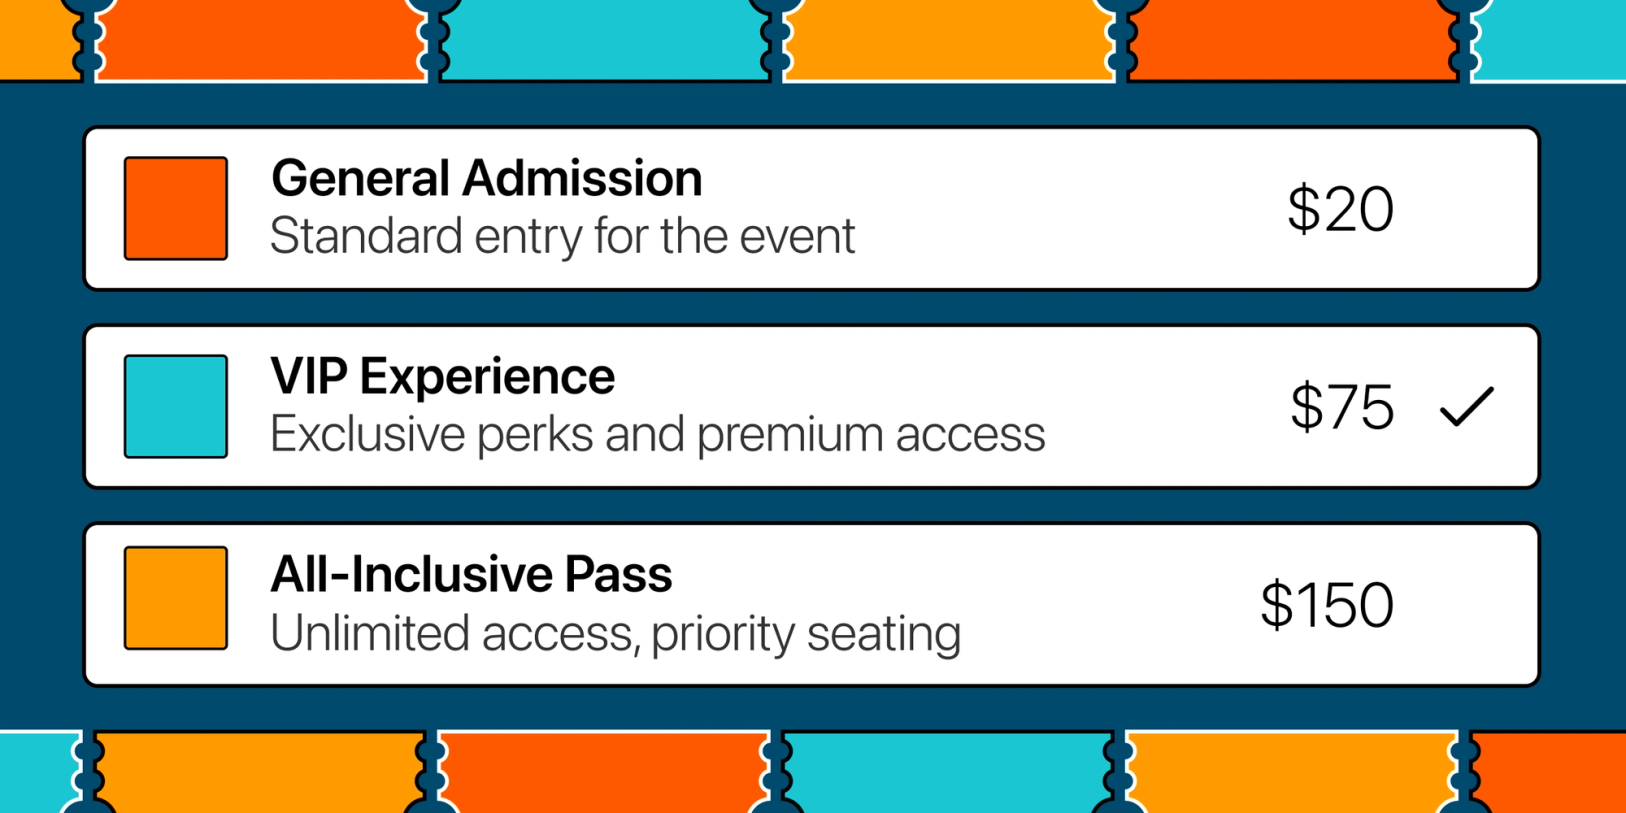 How to sell event tickets from your website without paying eye-watering ticketing fees